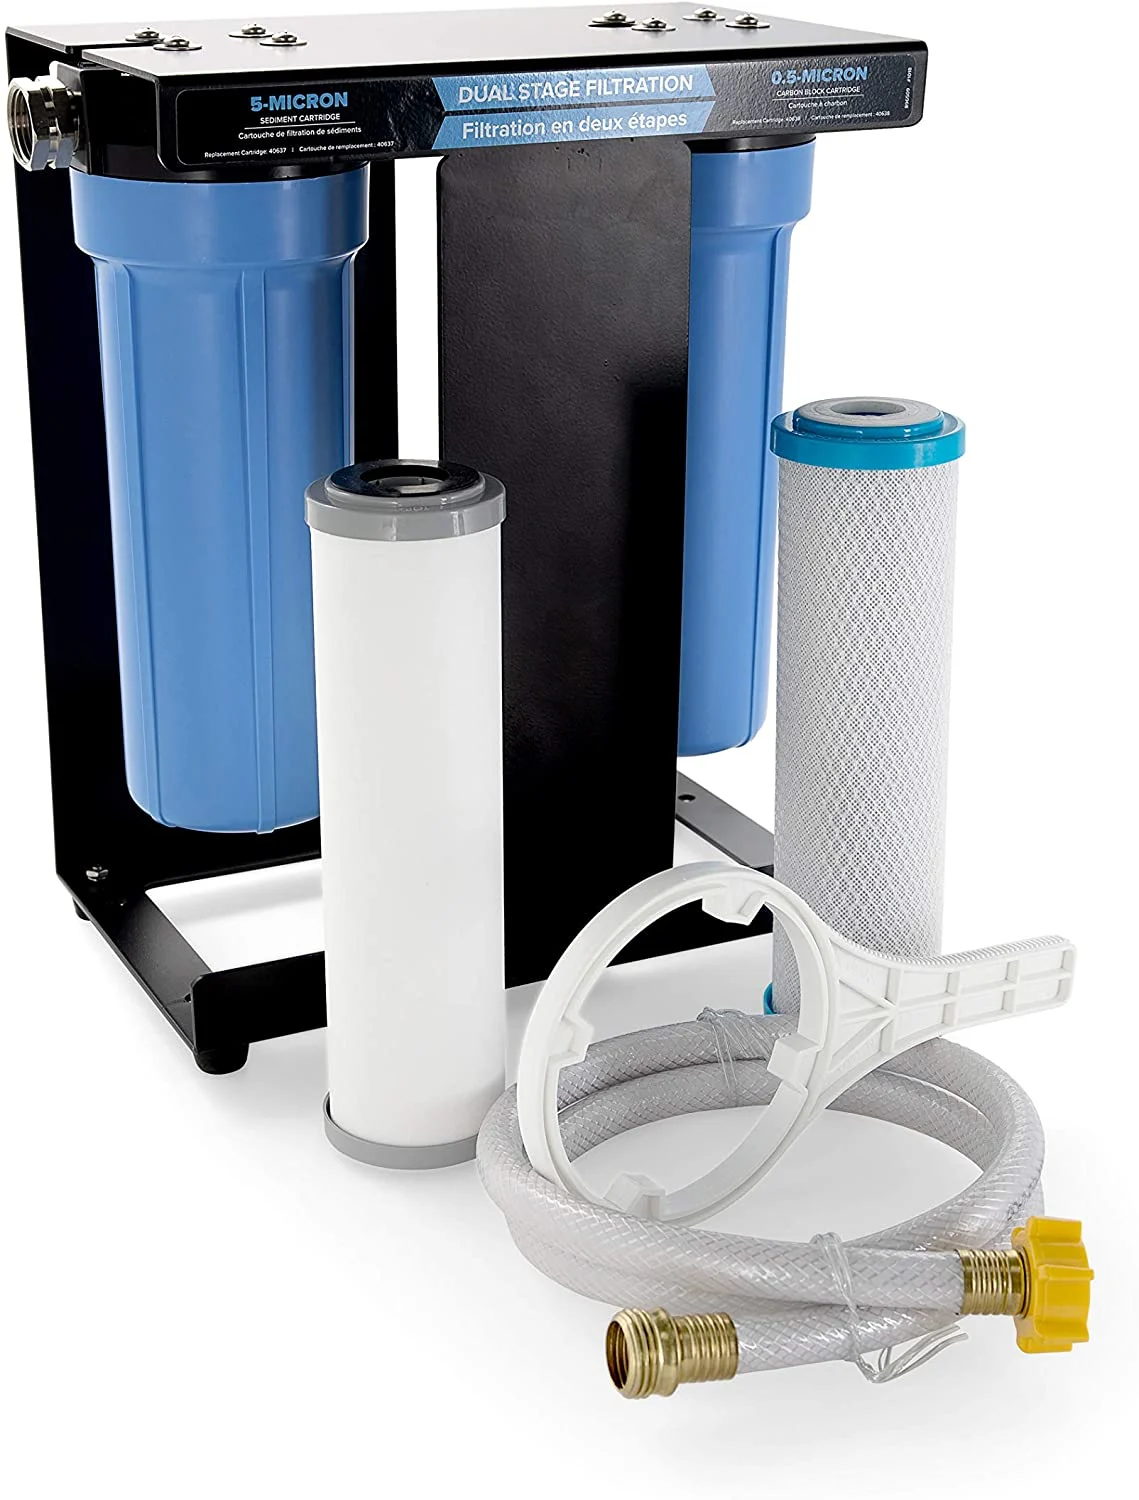 Canister-style RV water filters